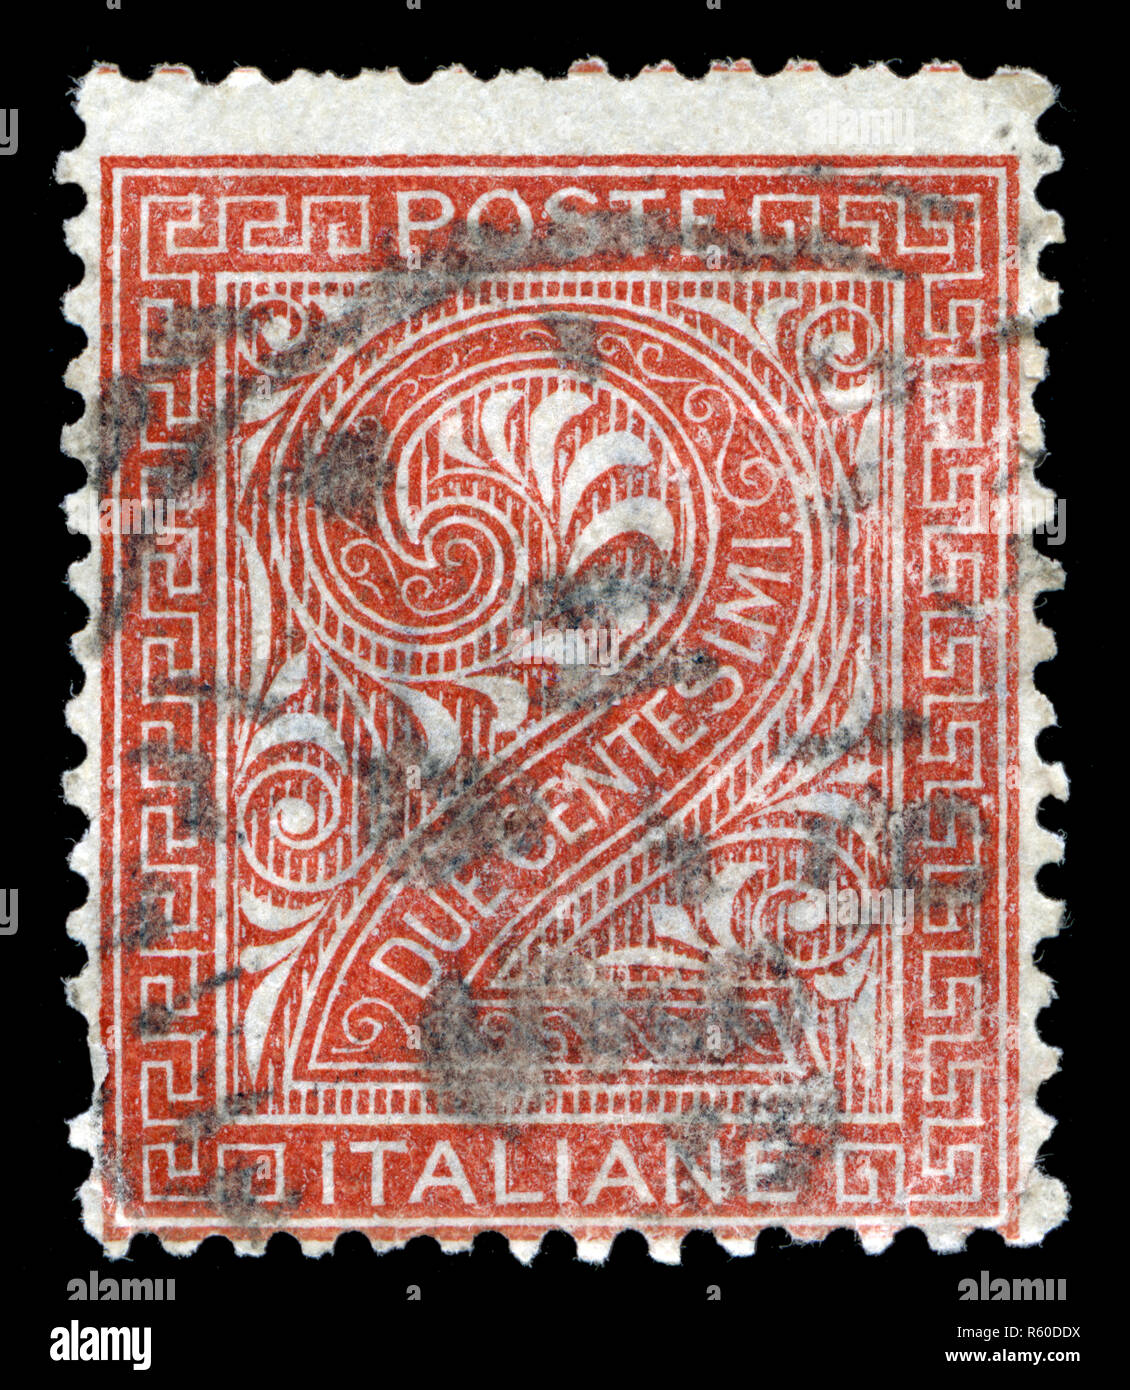 Postmarked stamp from Italy in the Edition De La Rue series issued in 1865 Stock Photo